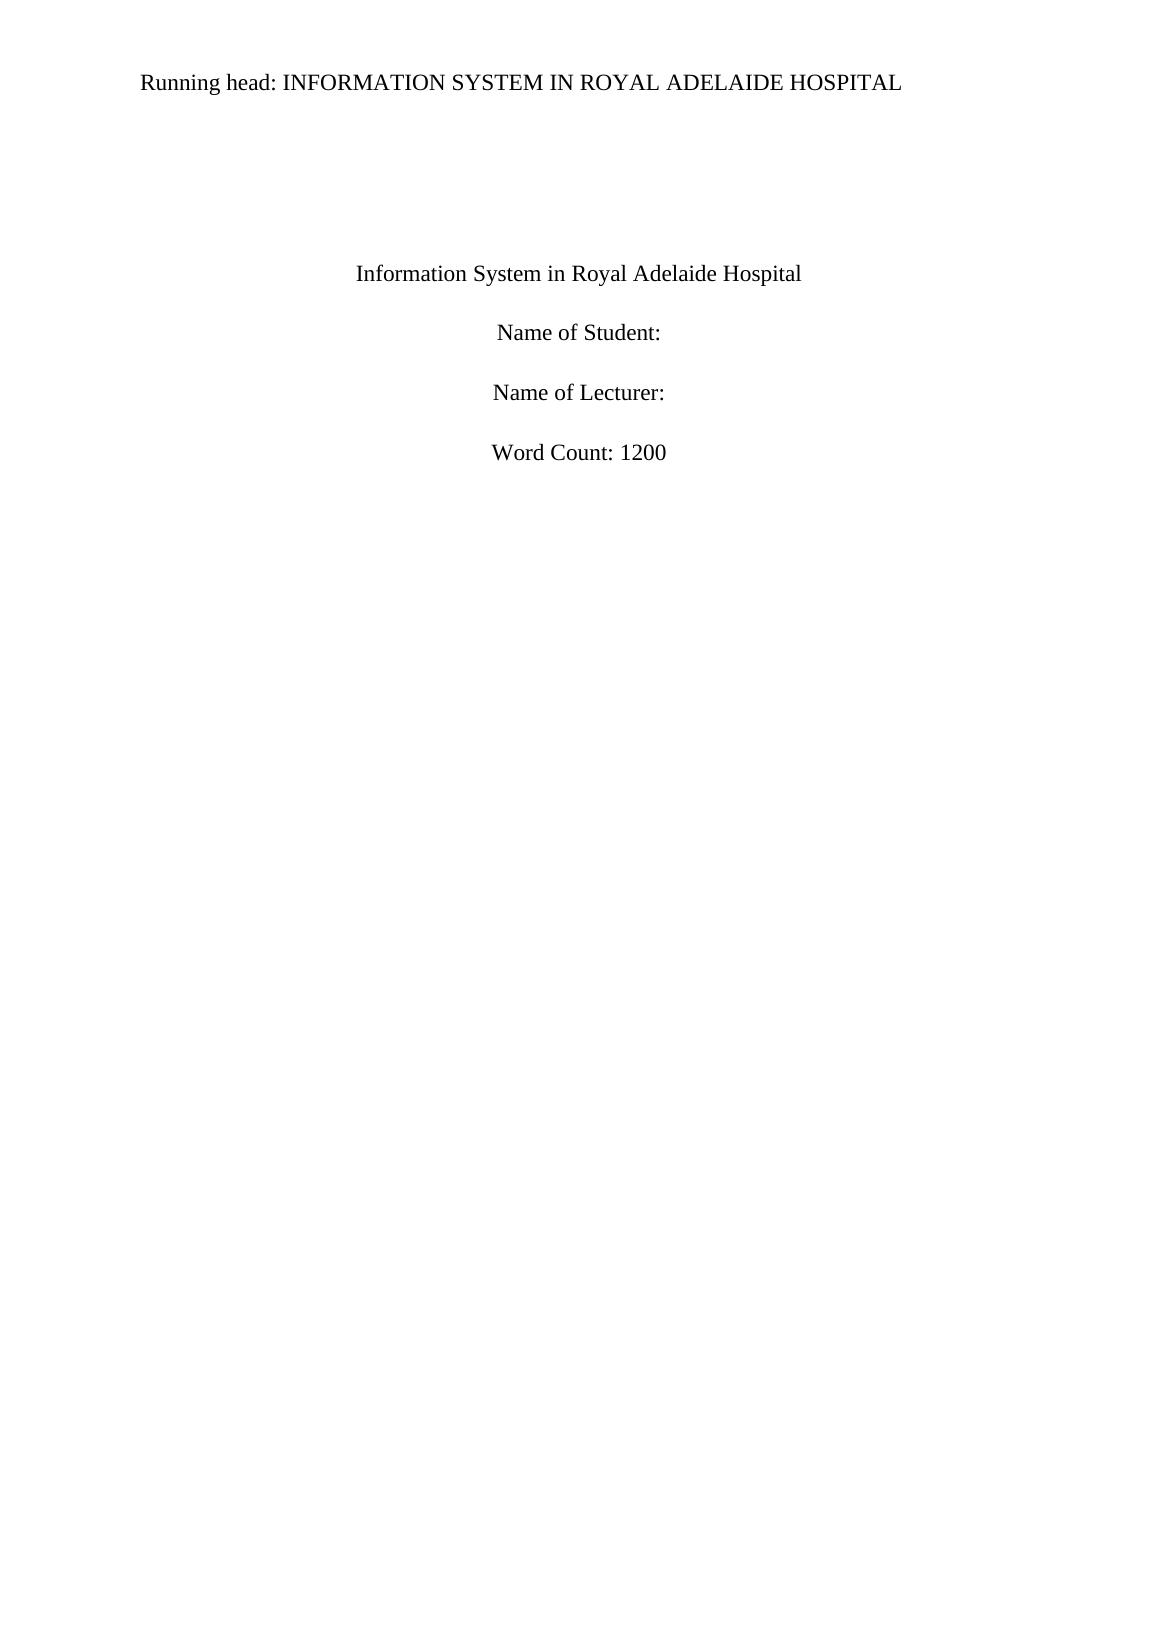 ITC100 - Information Management Systems in Hospital_1